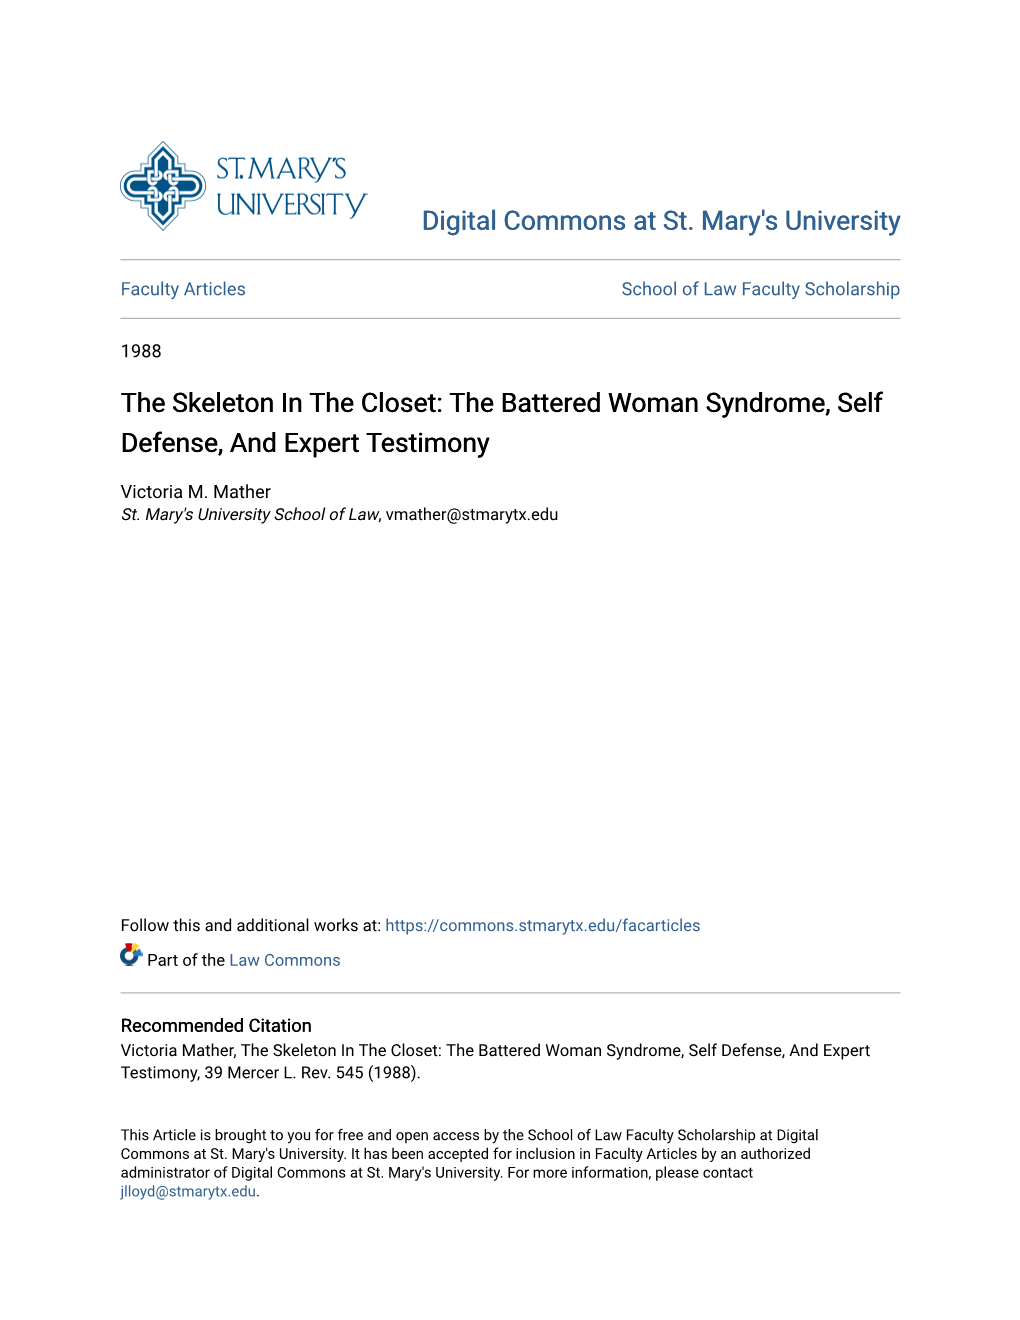 The Battered Woman Syndrome, Self Defense, and Expert Testimony